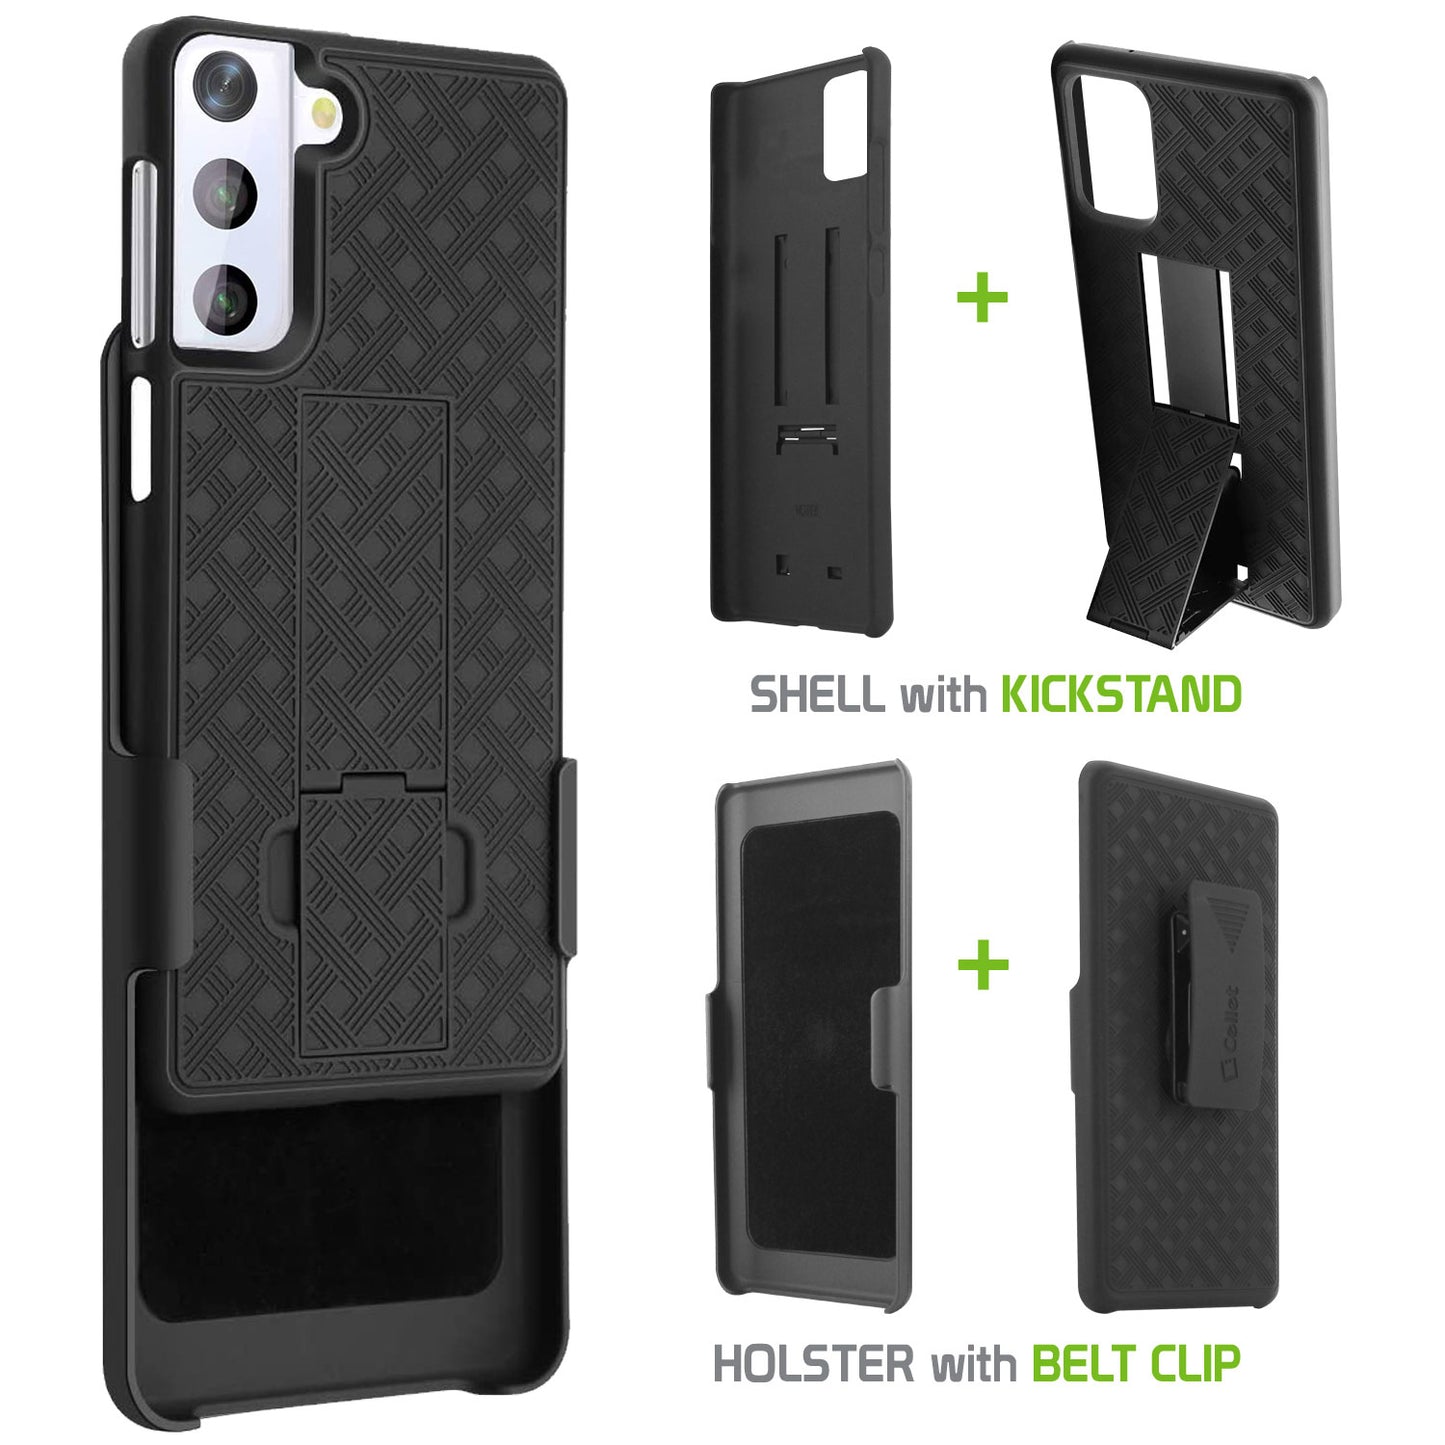 HLSAMS21 - Cellet Galaxy S21 Holster, Shell Holster Kickstand Case with Spring Belt Clip for Samsung Galaxy S21 Black